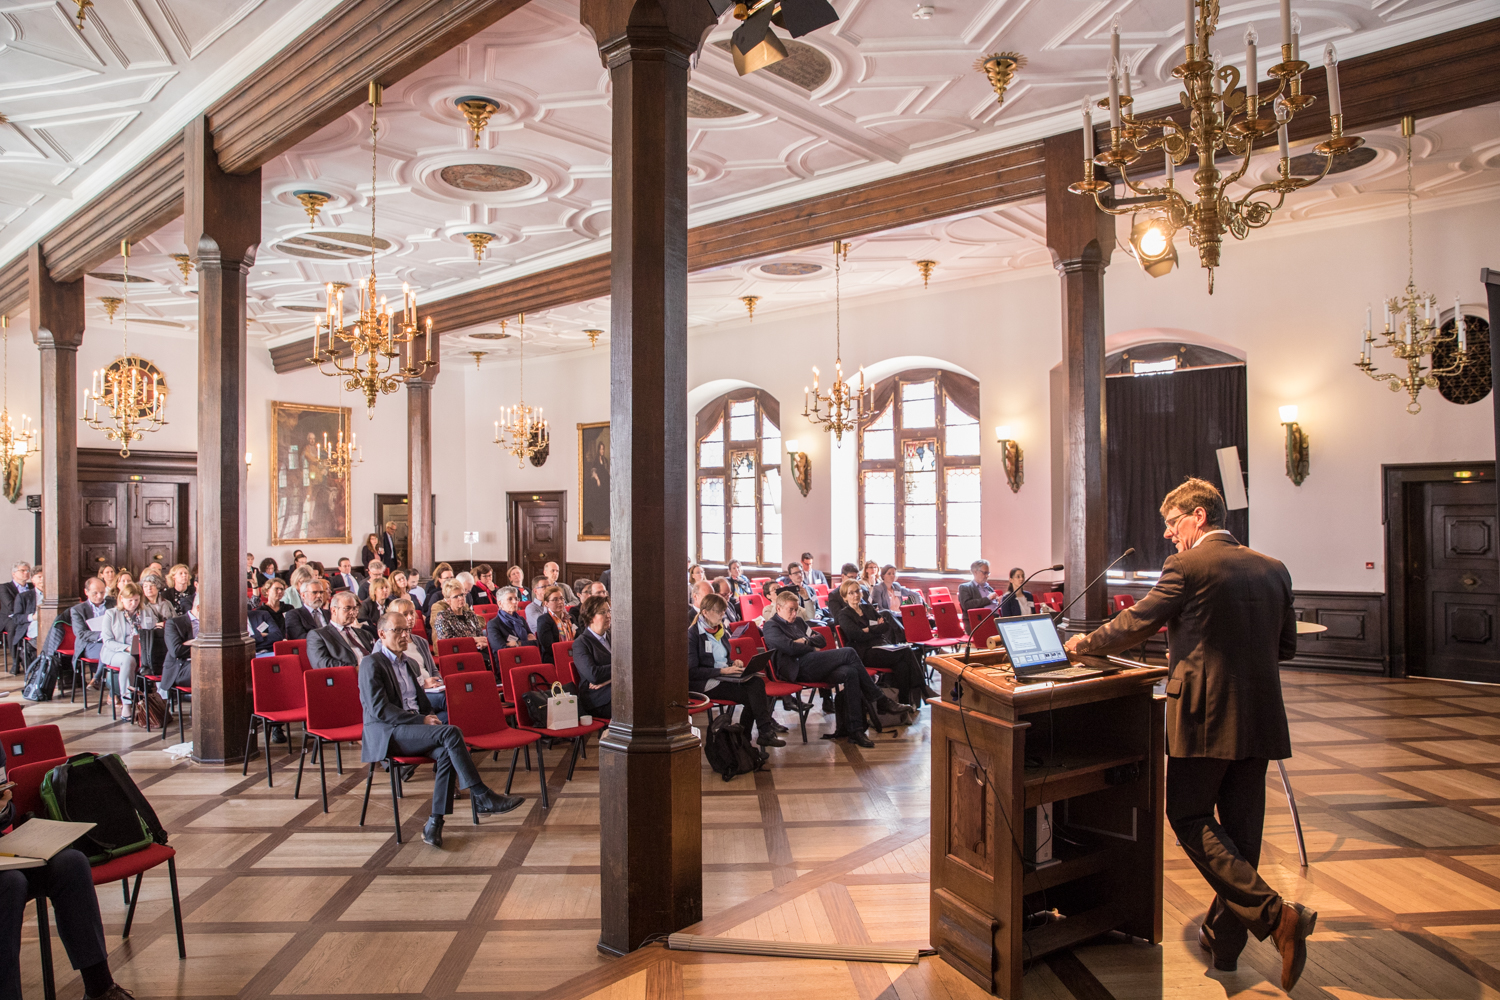 Sessions in the Imperial Room of Freiburg’s Historical Merchants’ Hall